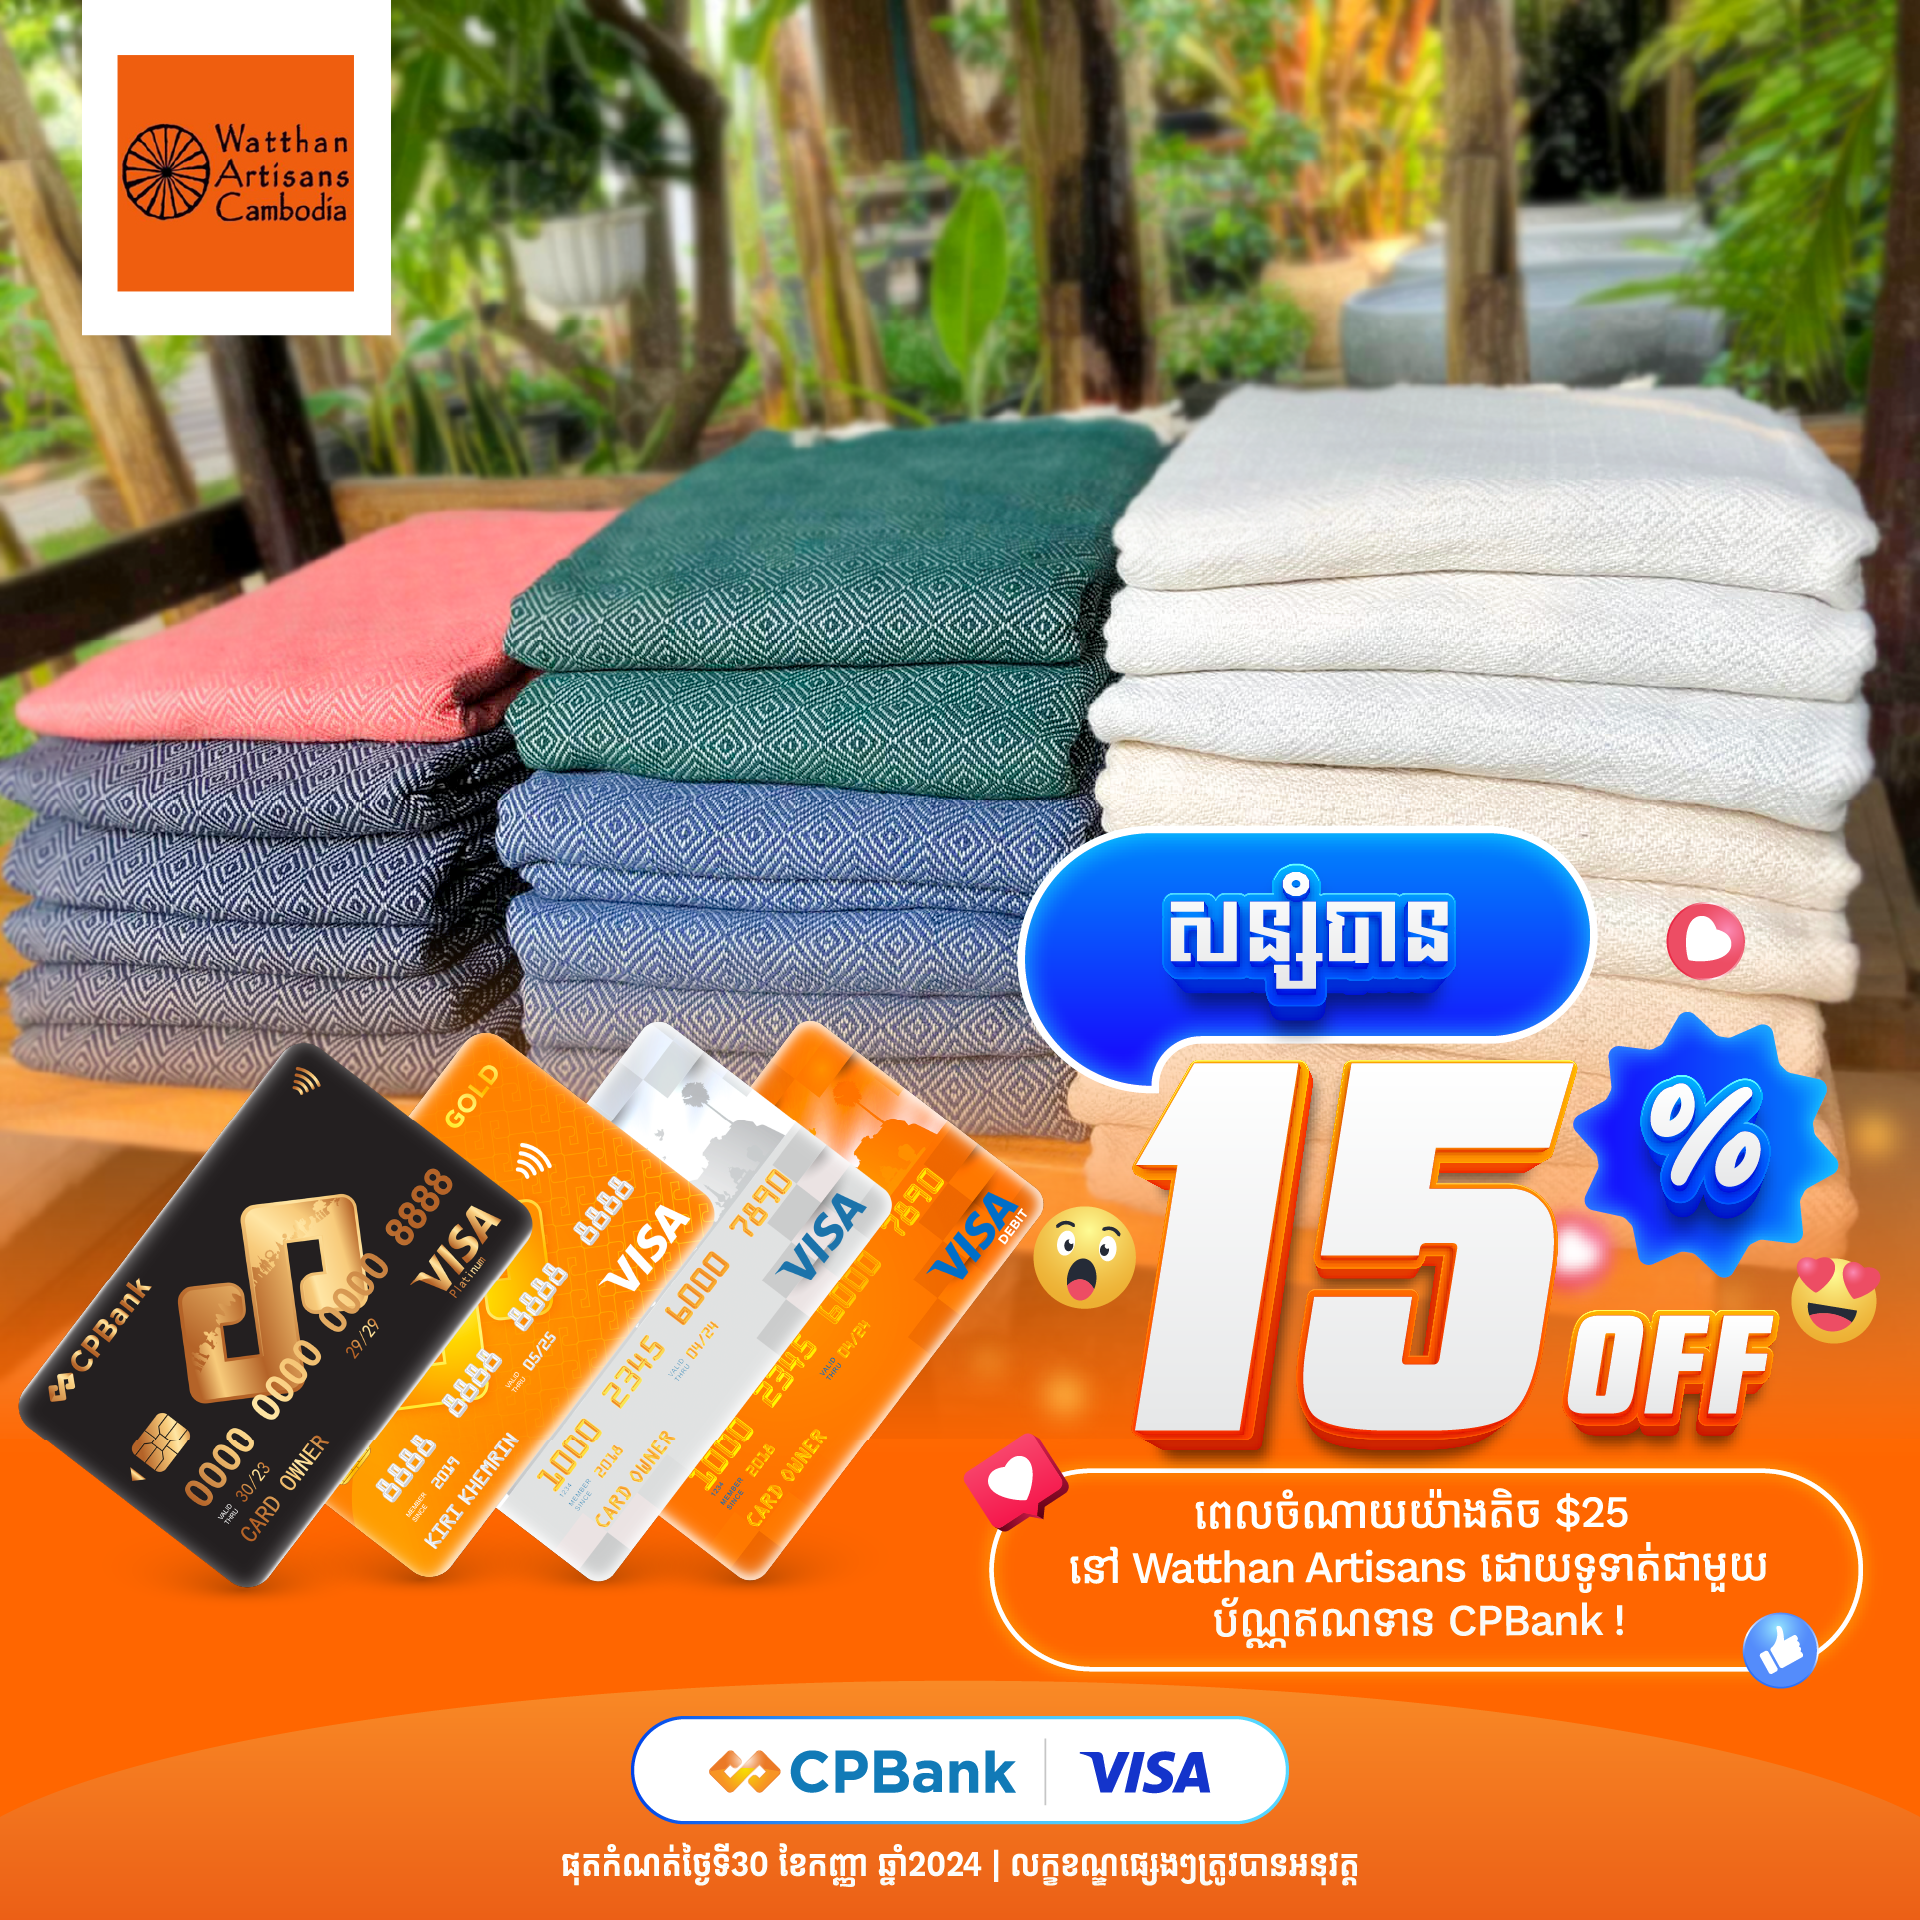 Get 15% off from Watthan Artisans with CPBank VISA Cards